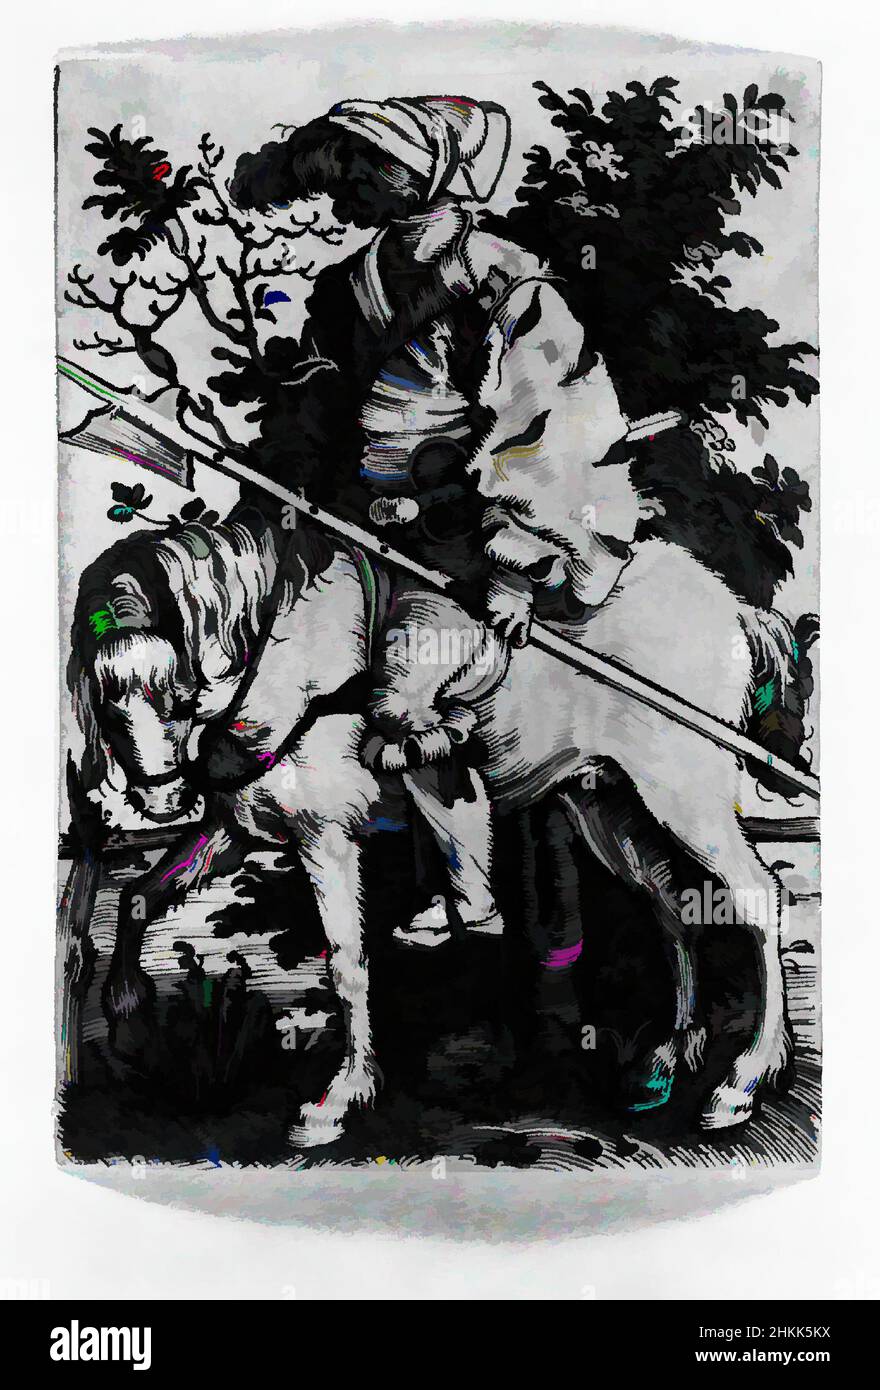 Art inspired by A Soldier on Horseback, Barthel Beham, German, 1502-1540, Engraving, Classic works modernized by Artotop with a splash of modernity. Shapes, color and value, eye-catching visual impact on art. Emotions through freedom of artworks in a contemporary way. A timeless message pursuing a wildly creative new direction. Artists turning to the digital medium and creating the Artotop NFT Stock Photo